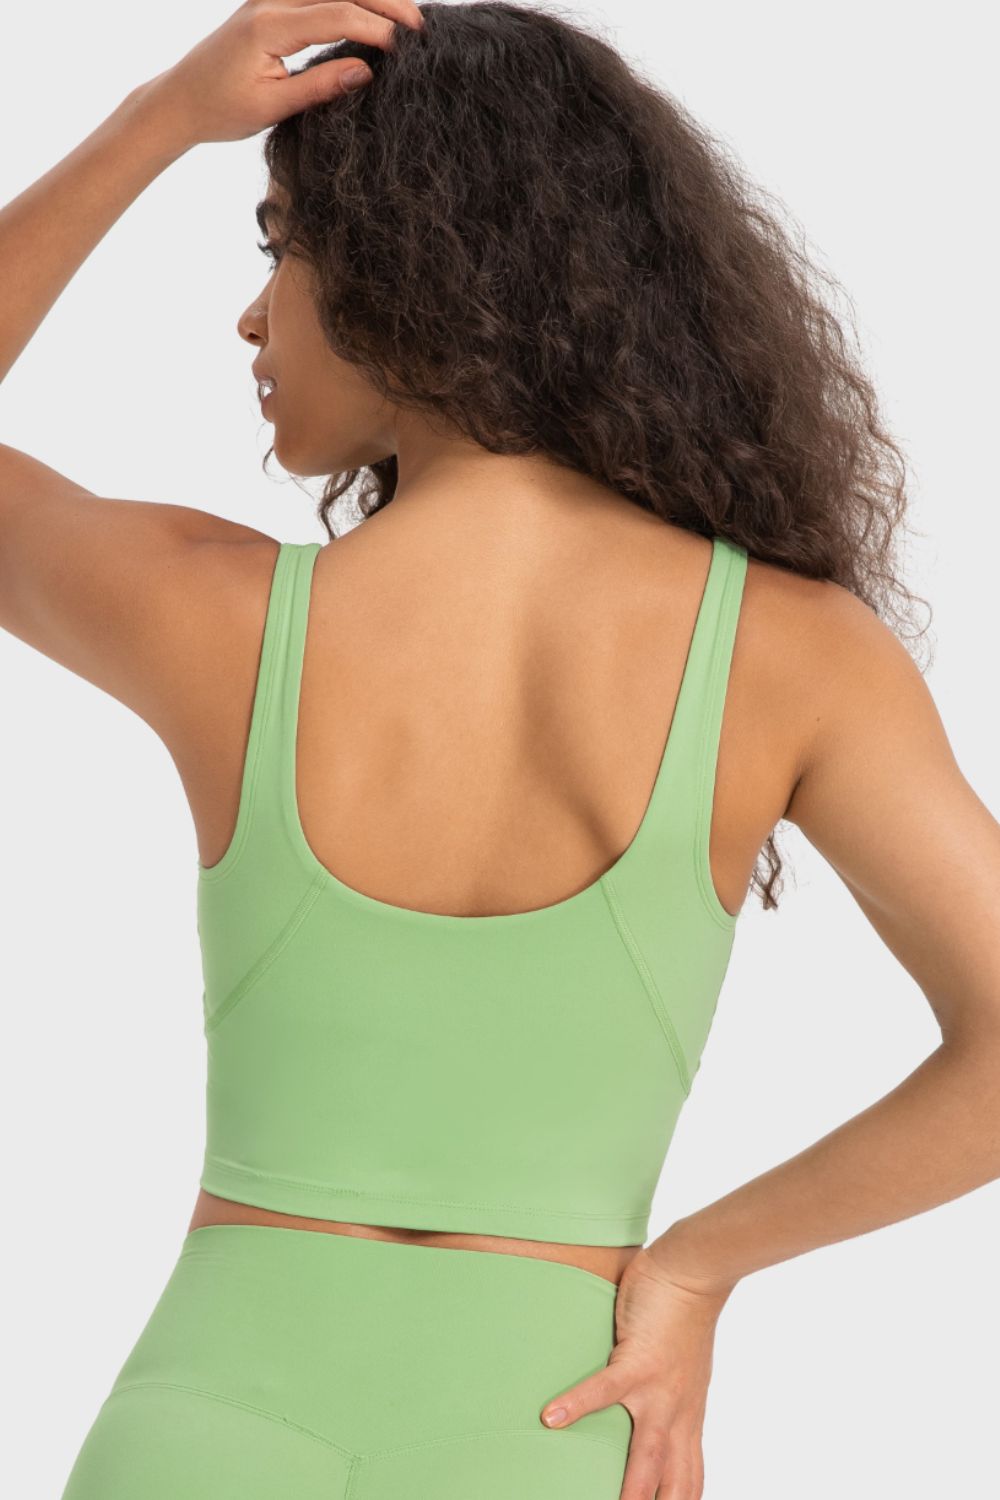 Cropped Sports Bra Top – Bad Peach Fitness